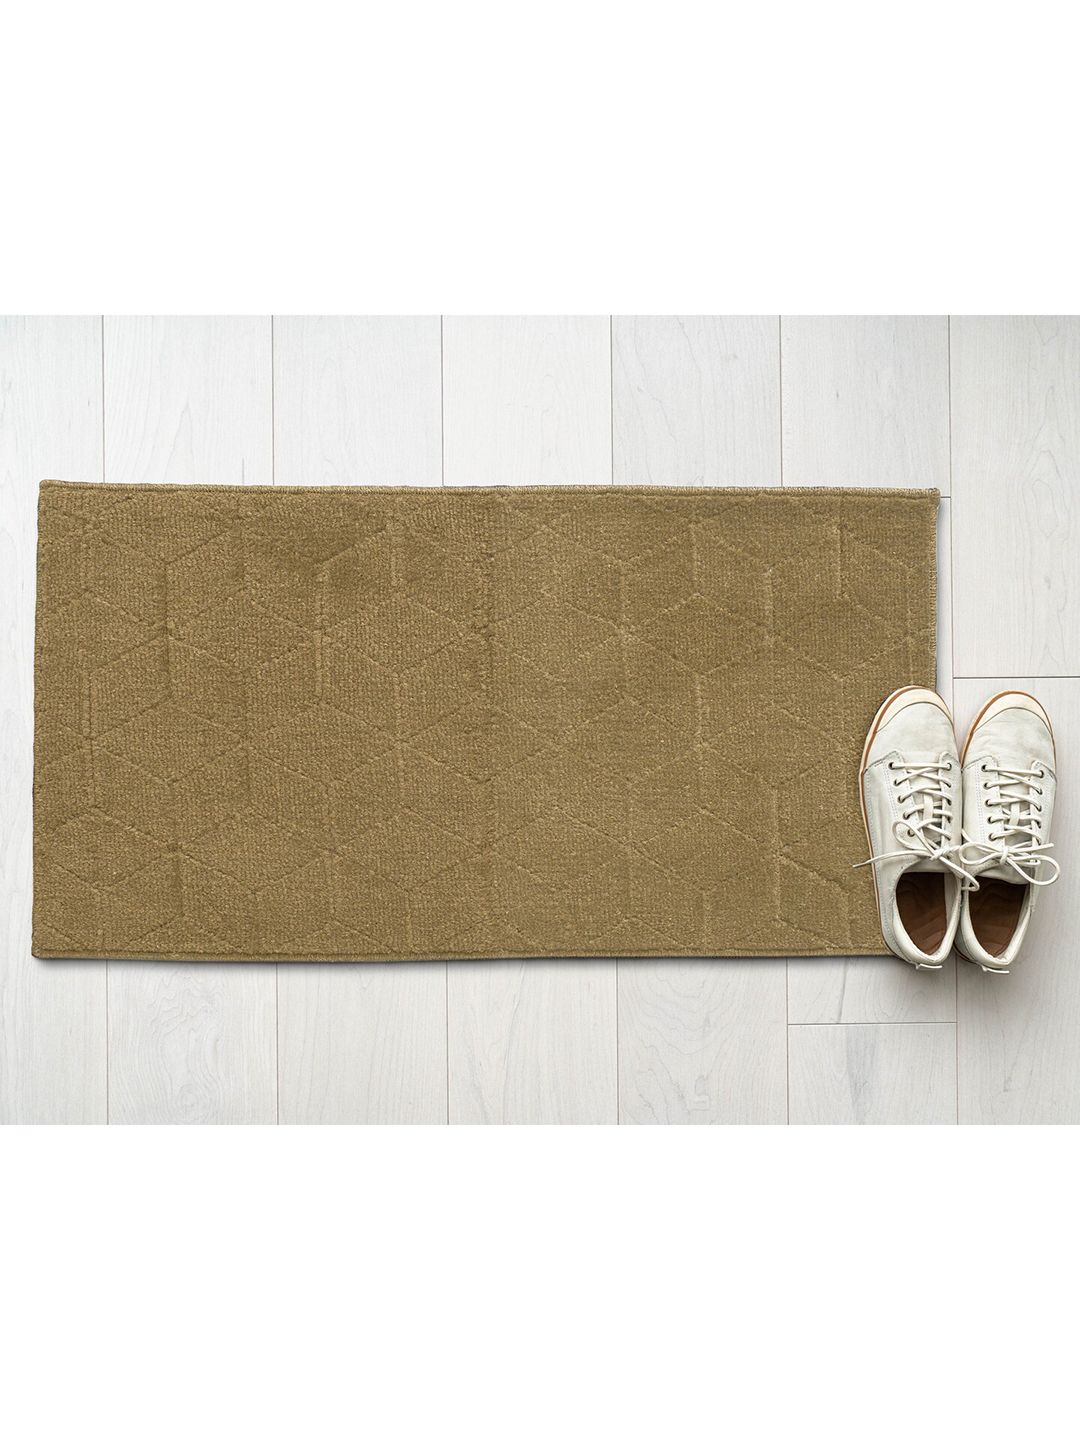 Saral Home Beige Solid Cotton Anti-Skid Doormats Price in India